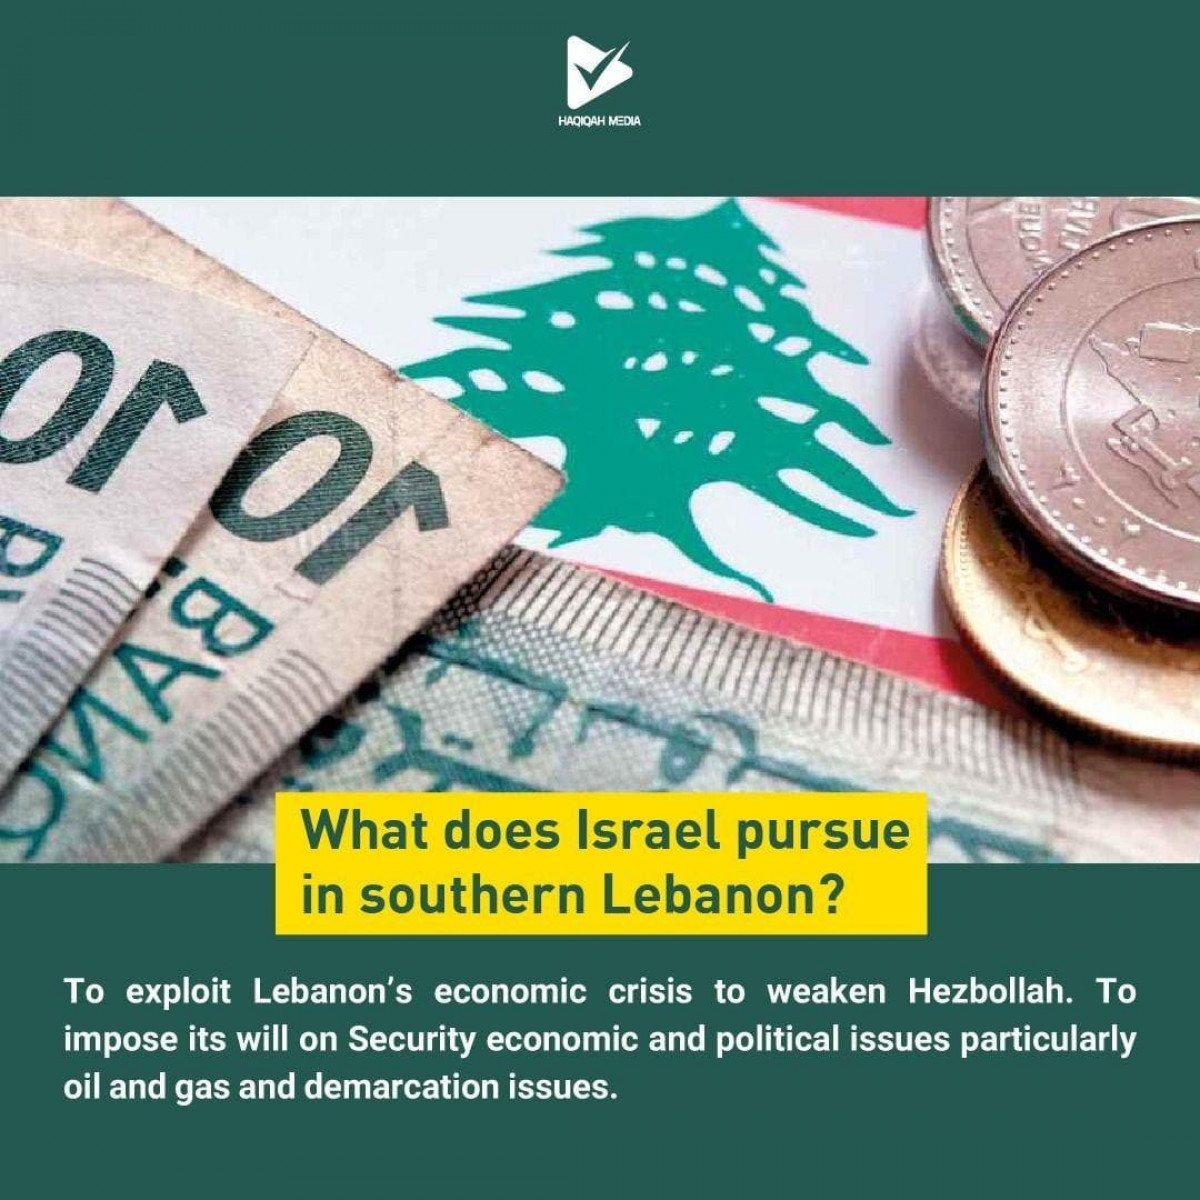 What does Israel pursue in southern Lebanon?